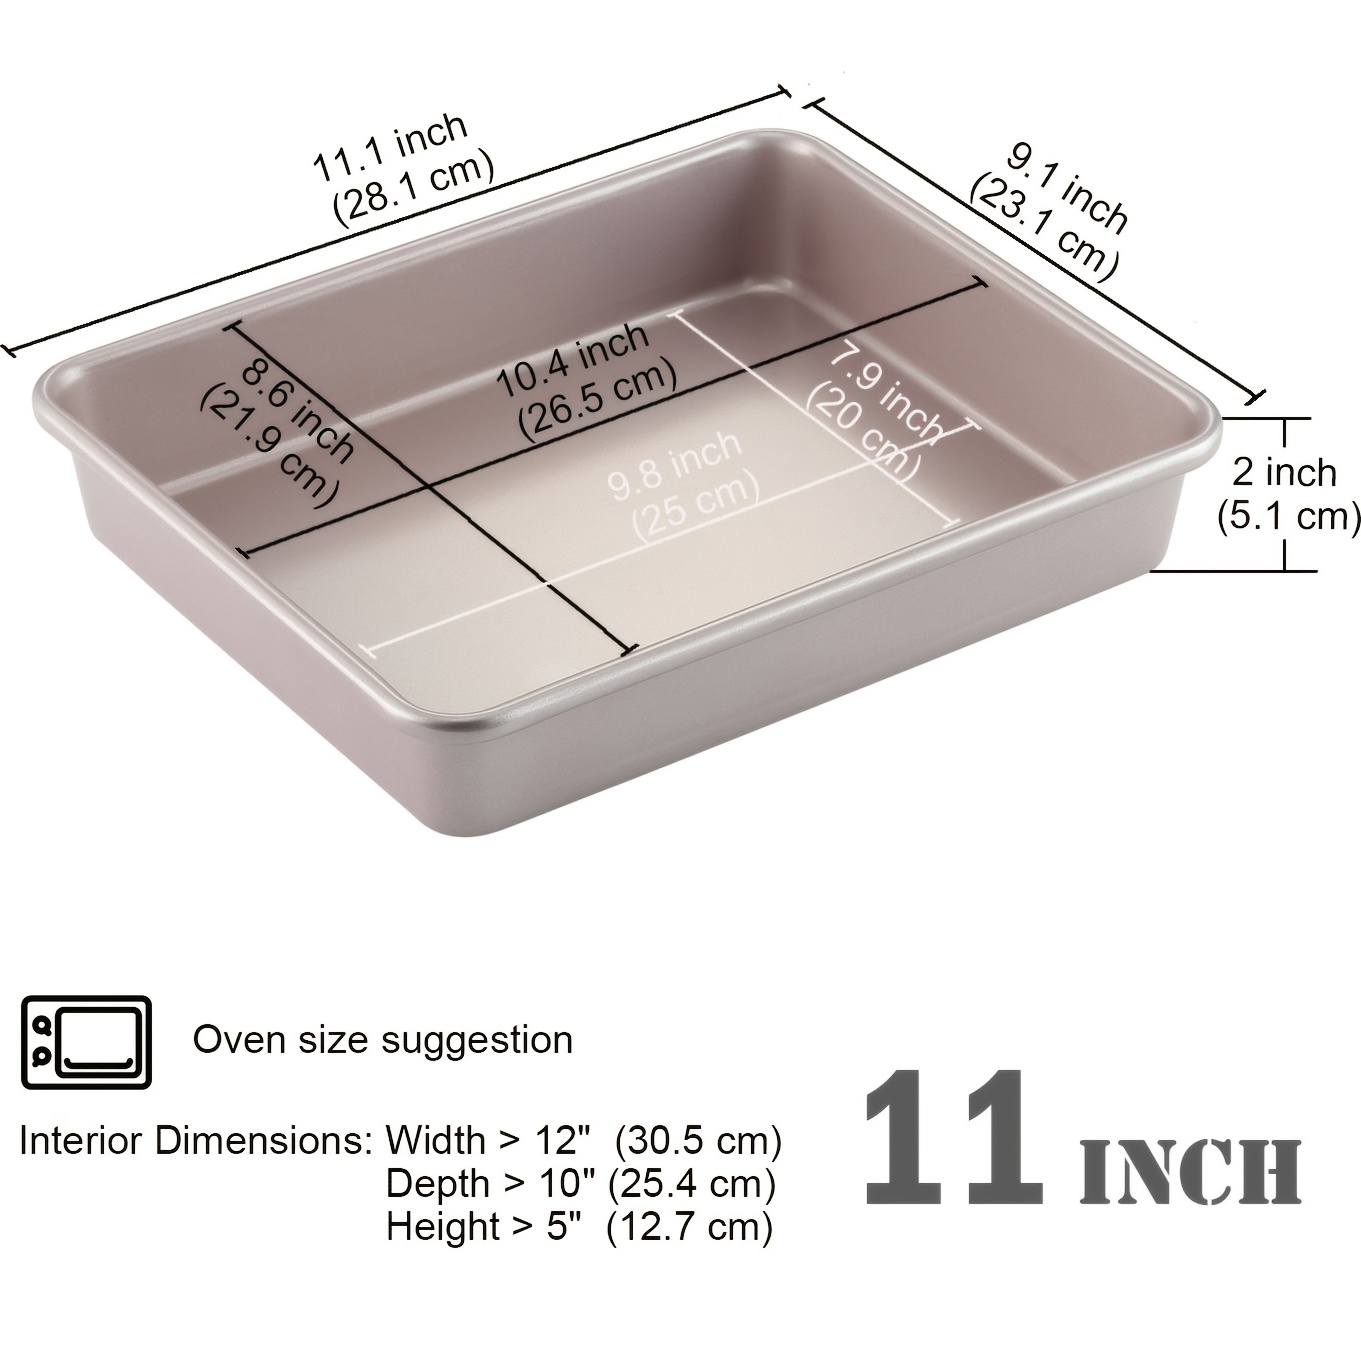 Jelly Roll Pan Nonstick 15 x 10 inches